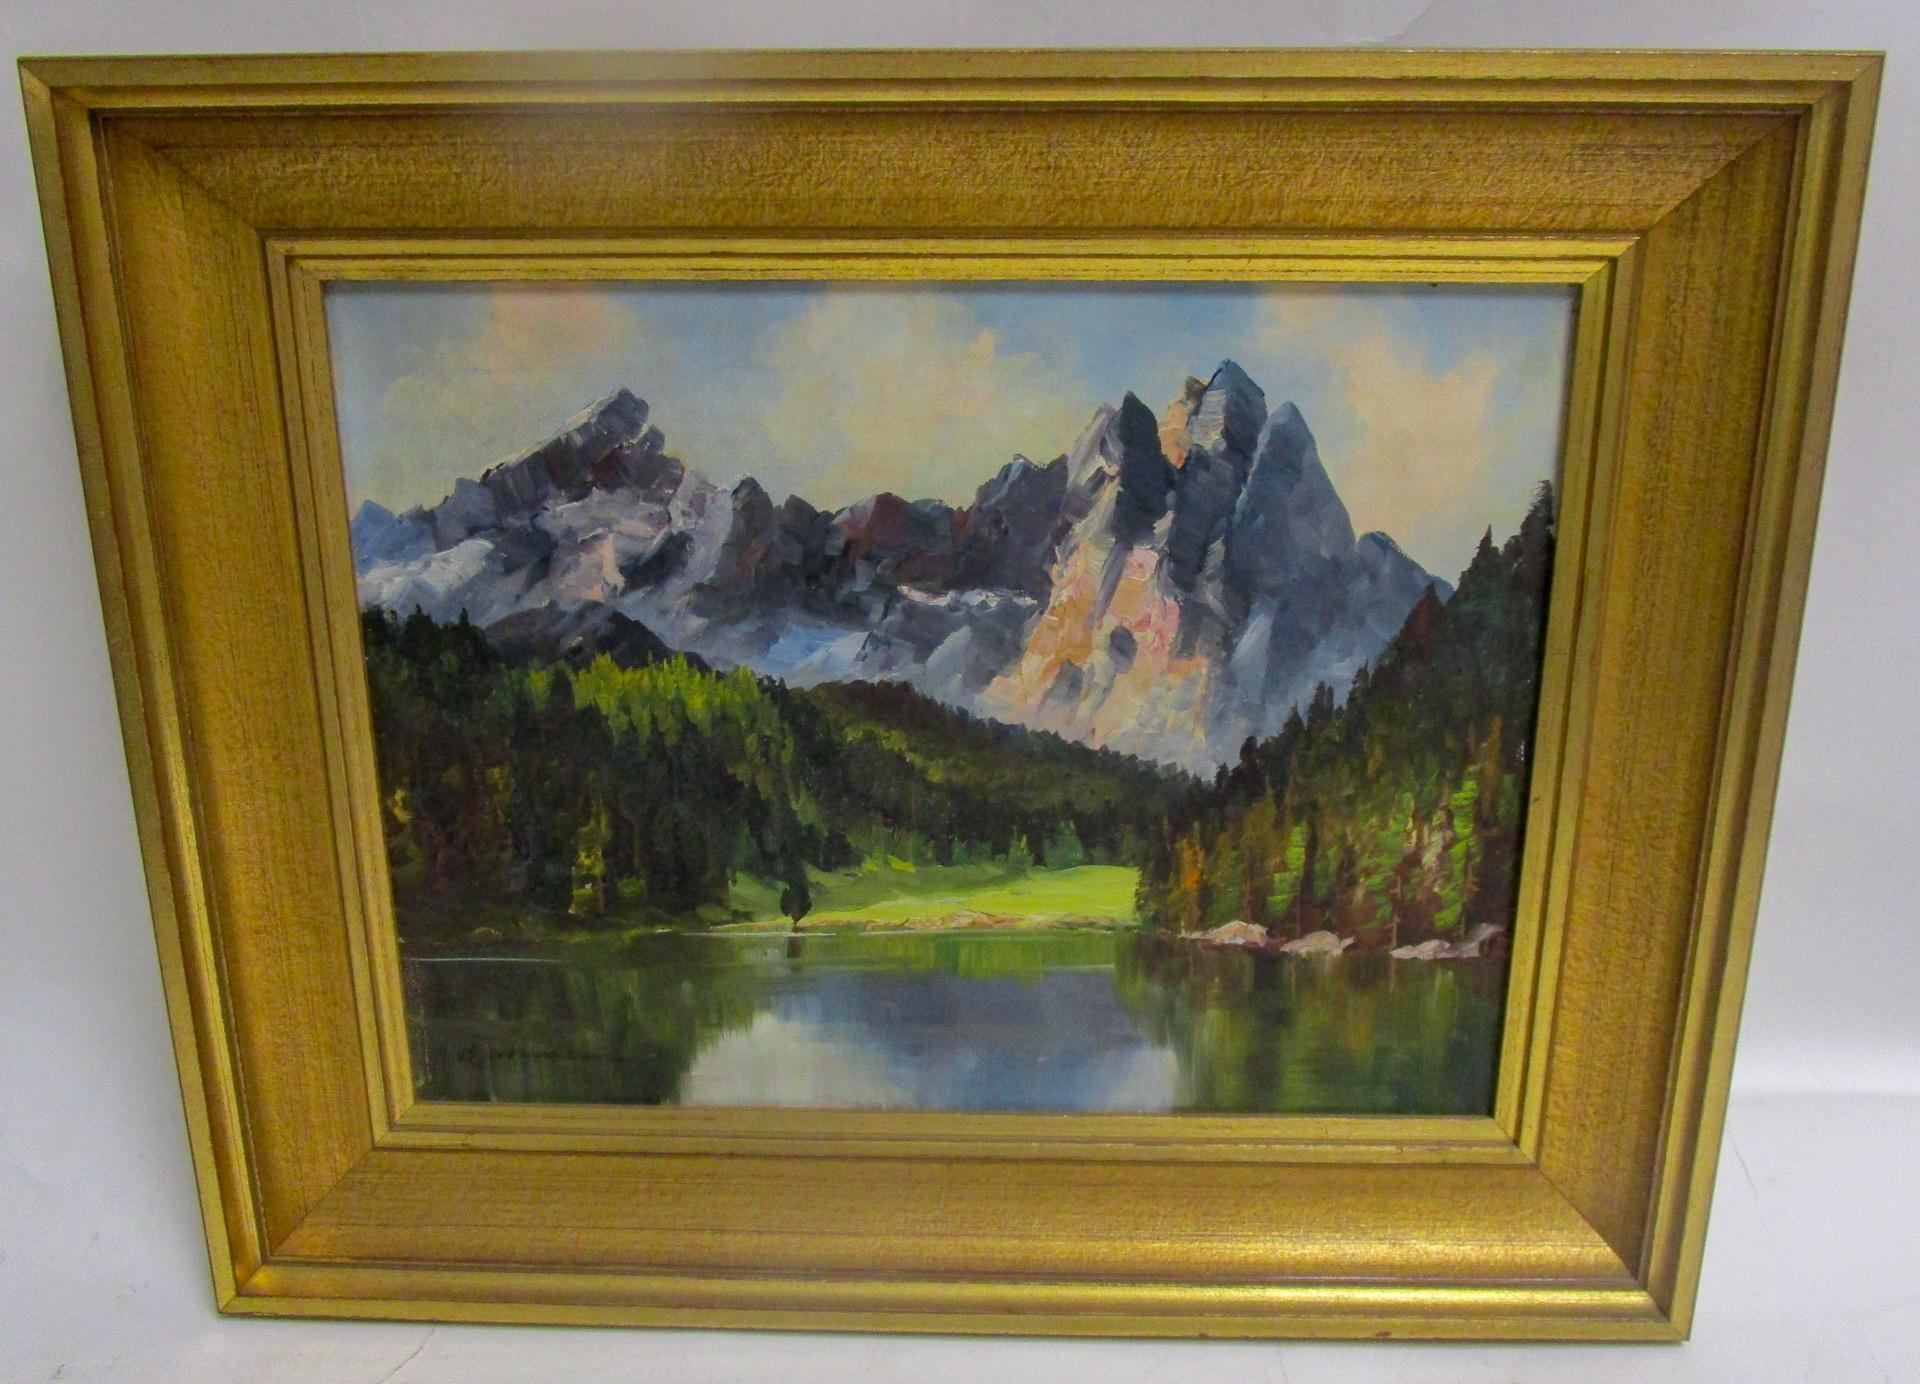 This tranquil fine landscape oil painting depicts a quaint lake nestled in the Swiss Alps (Seealpsee). Artist signed but it is not legible. Features include nice detail and lovely color. Framed in vintage gilt frame. Handsome 2.50 inch gold giltwood